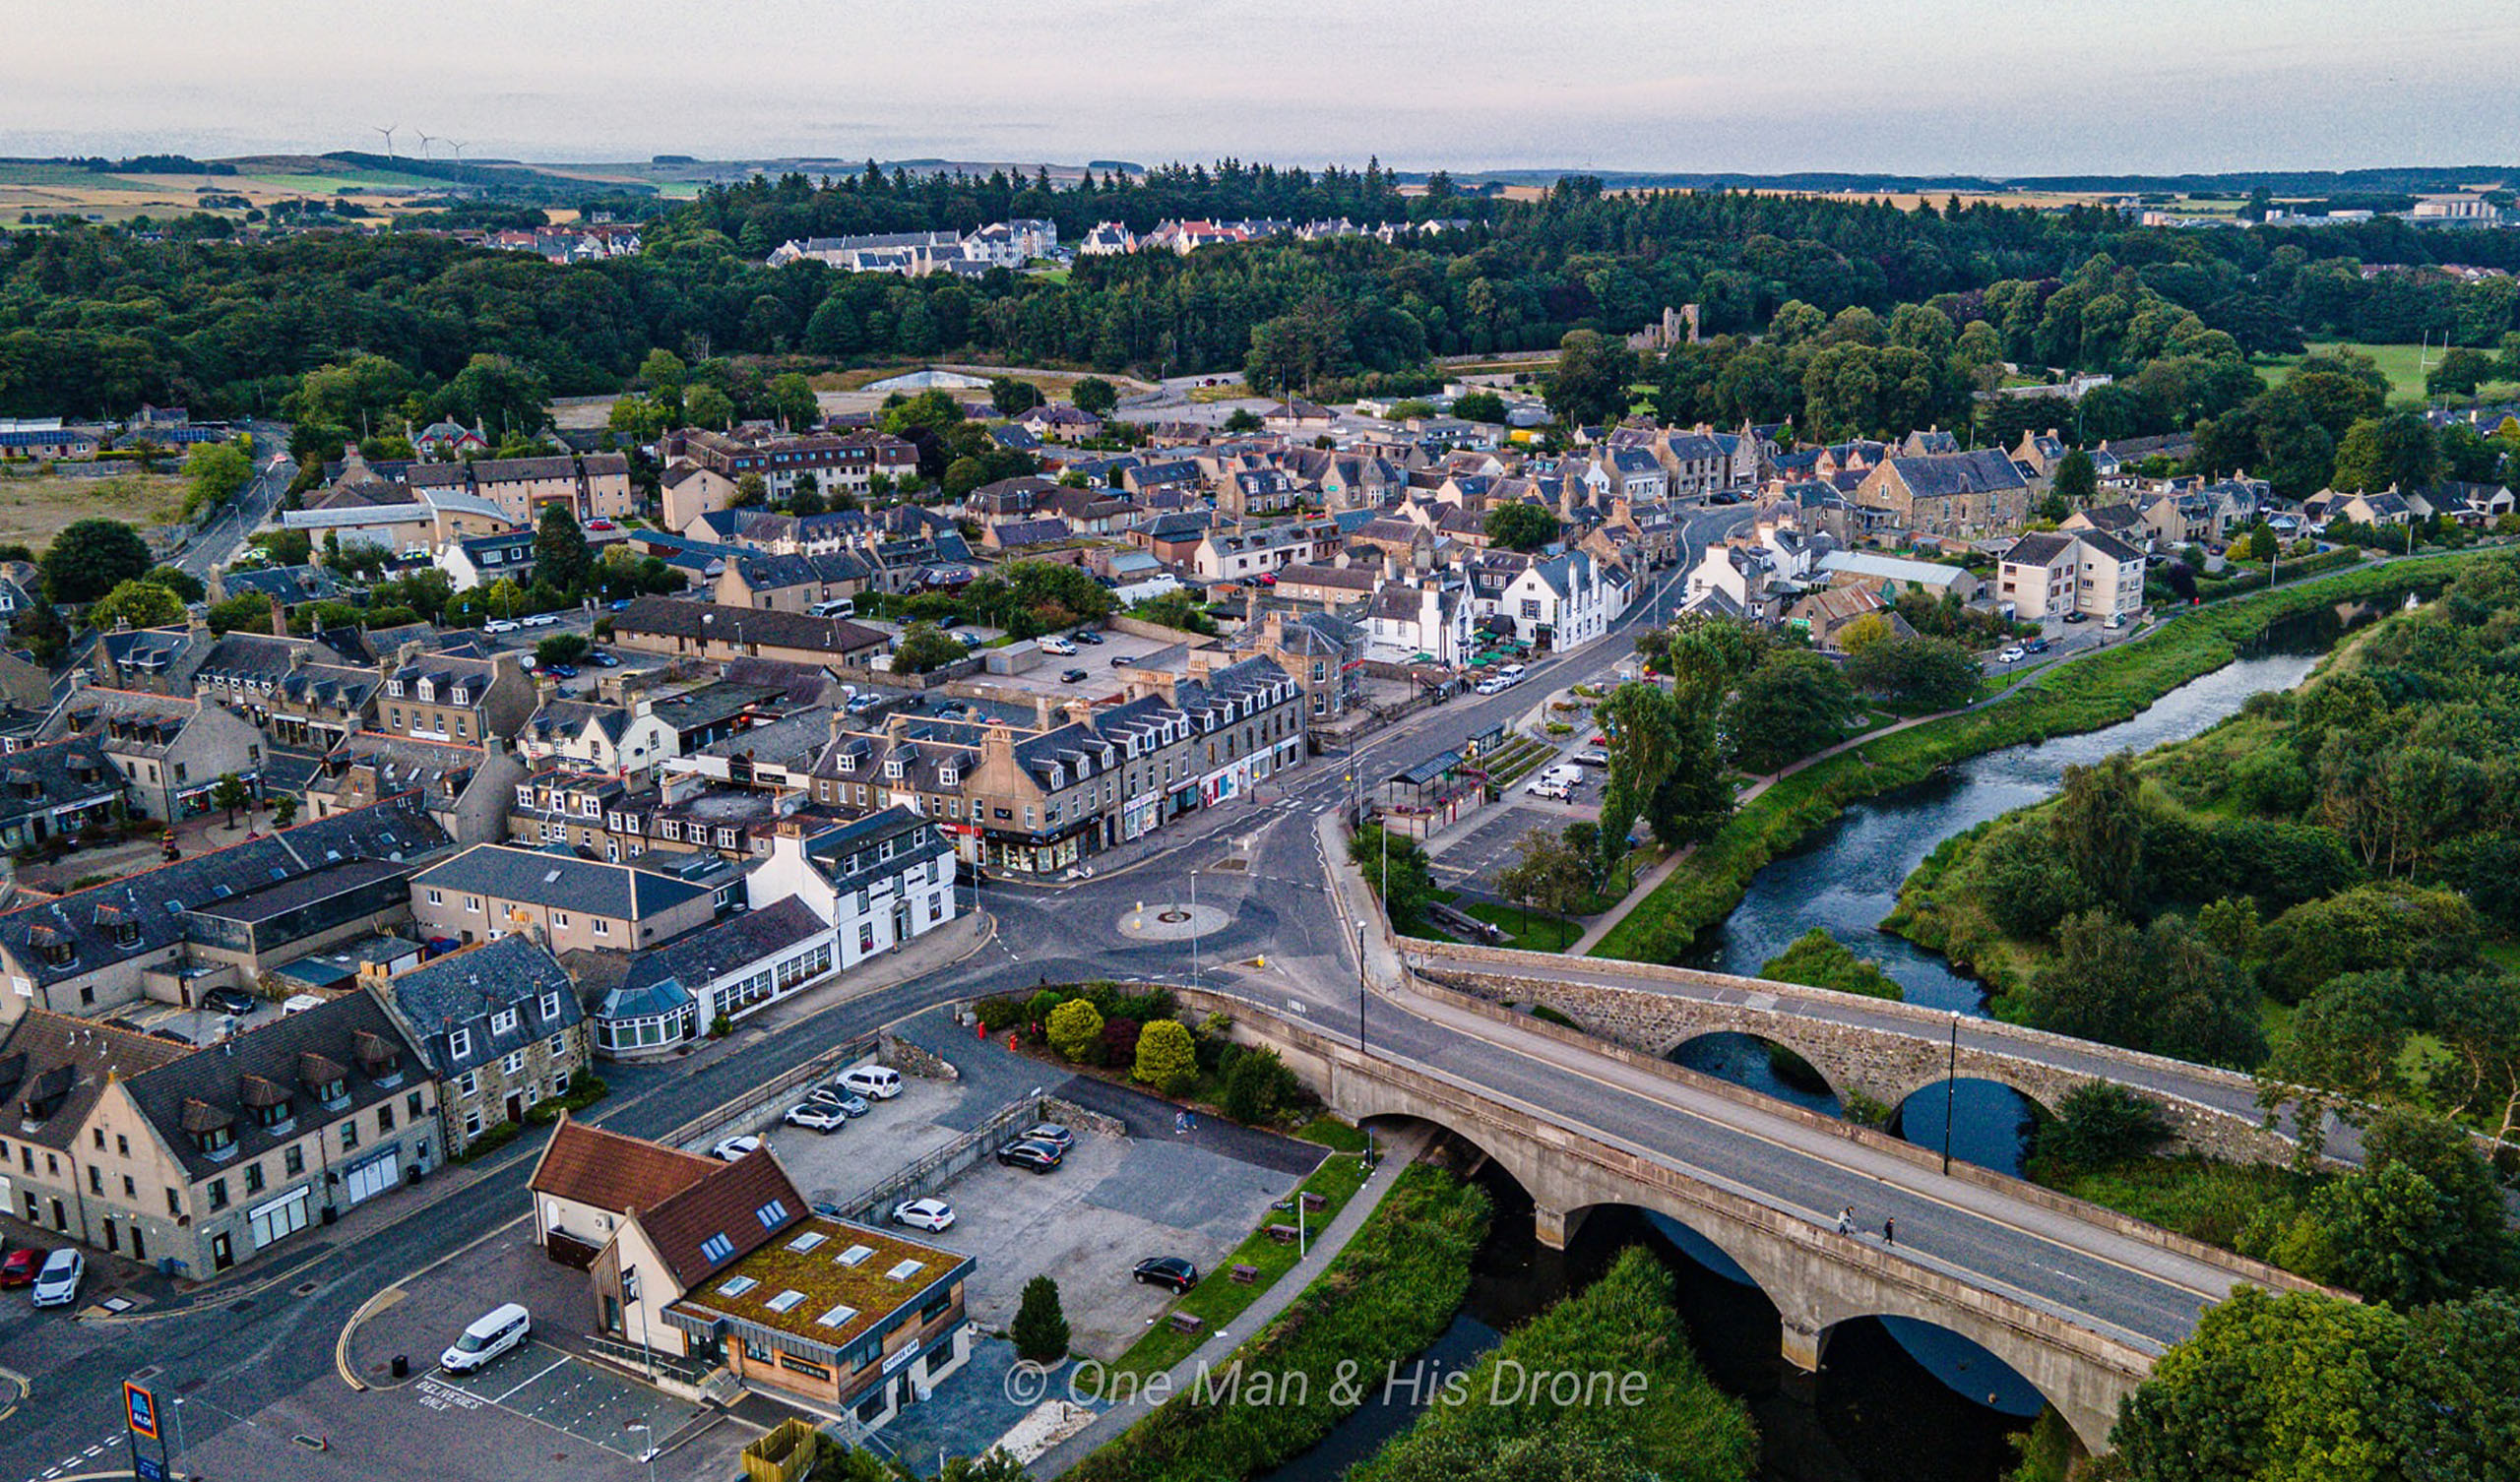 Photograph courtesy of One Man & His Drone - The town of Ellon, Aberdeenshire - Drone footage